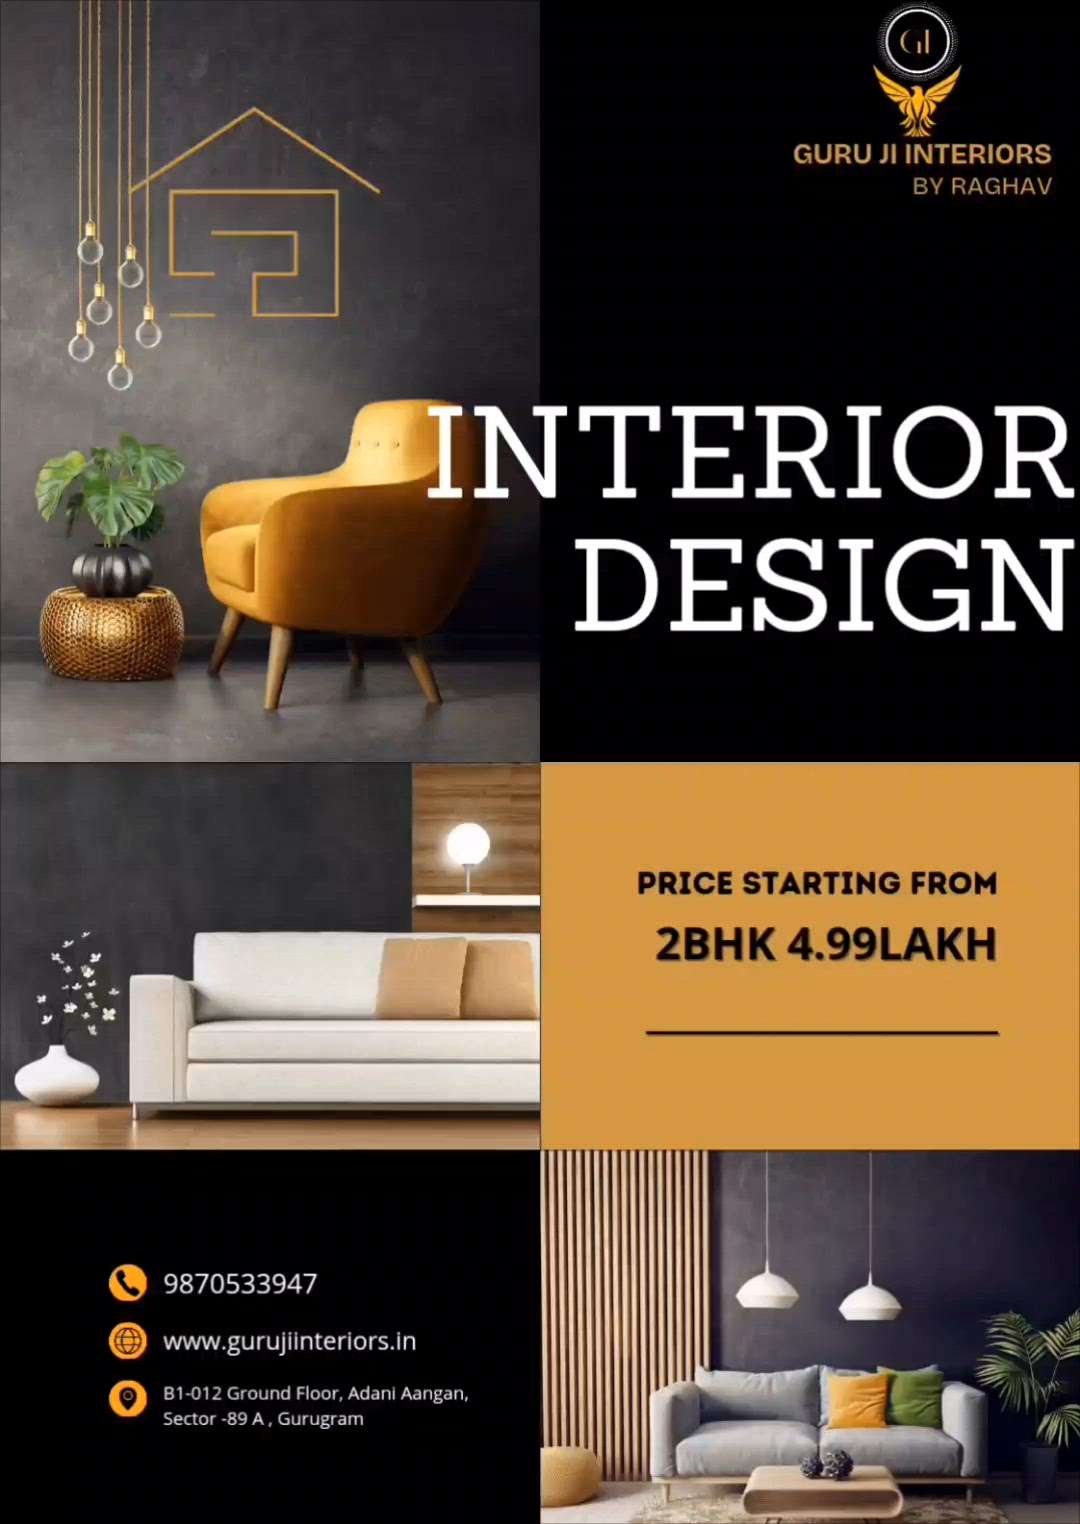 @COMPLETE HOME INTERIOR 
.
Guruji interiors provides you to fulfill your dream house in your budget with best quality
#gurujiinteriors
.